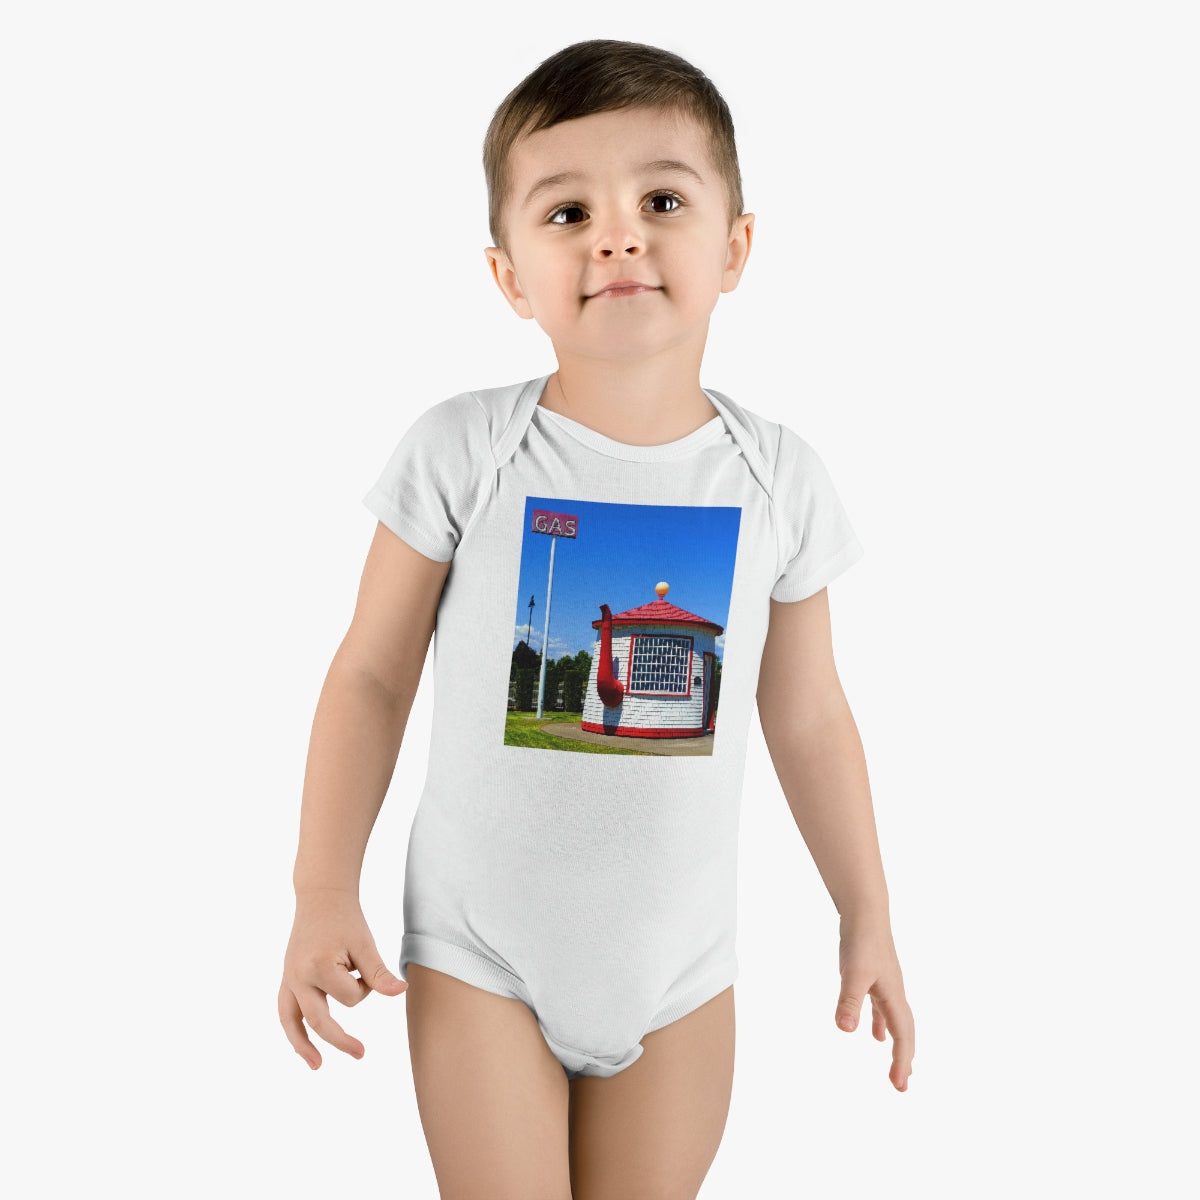 Historic Teapot Dome Service Station - Baby Short Sleeve Onesie - Fry1Productions